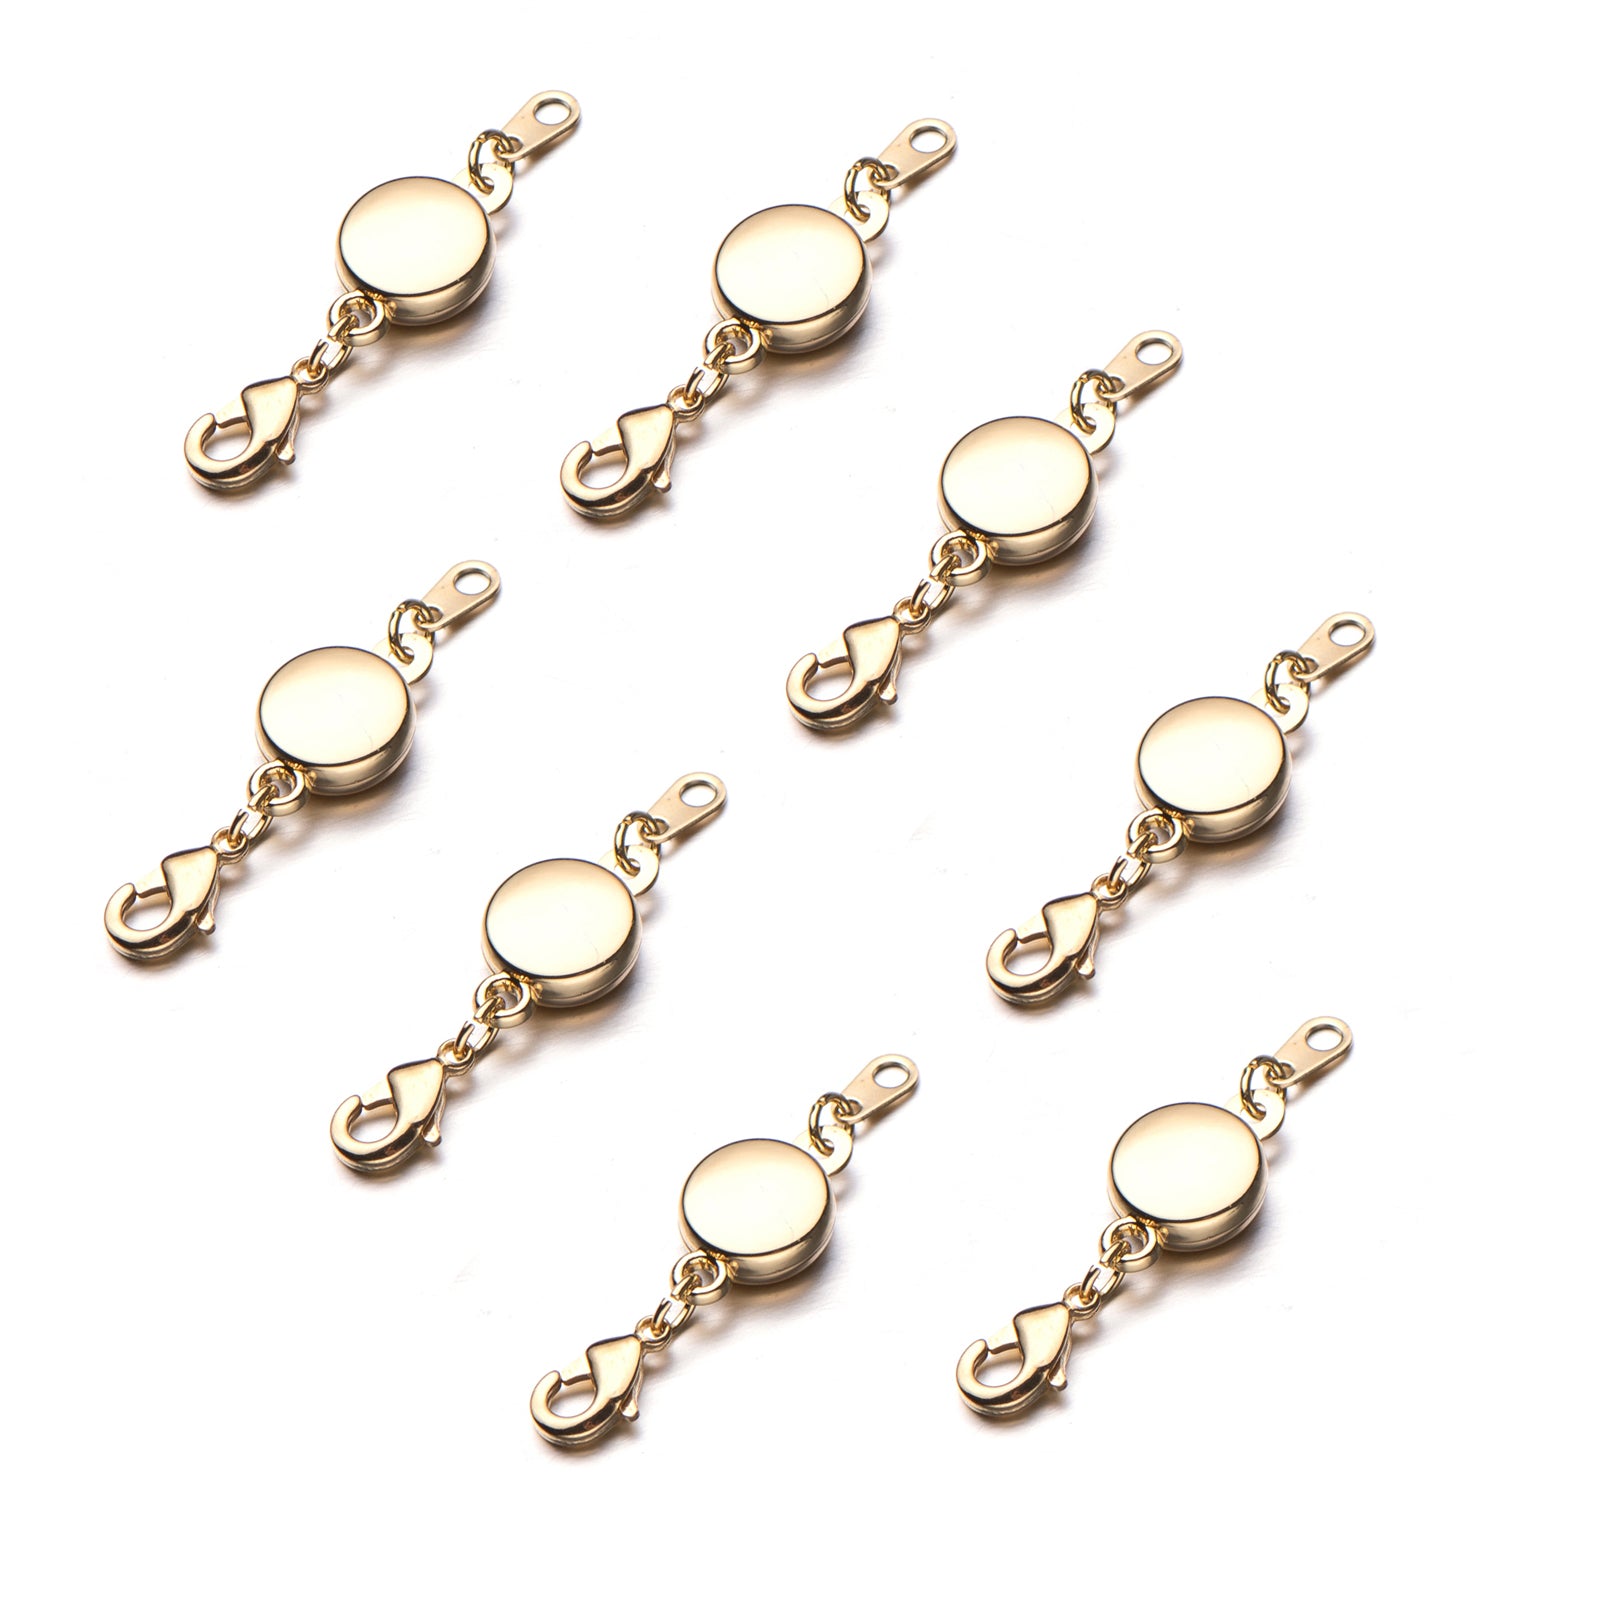  Zpsolution Stainless Steel Magnetic Clasps for Jewelry, 18K  Gold Plated Magnetic Jewelry Clasps for Necklaces Bracelet Extender Jewelry  Making